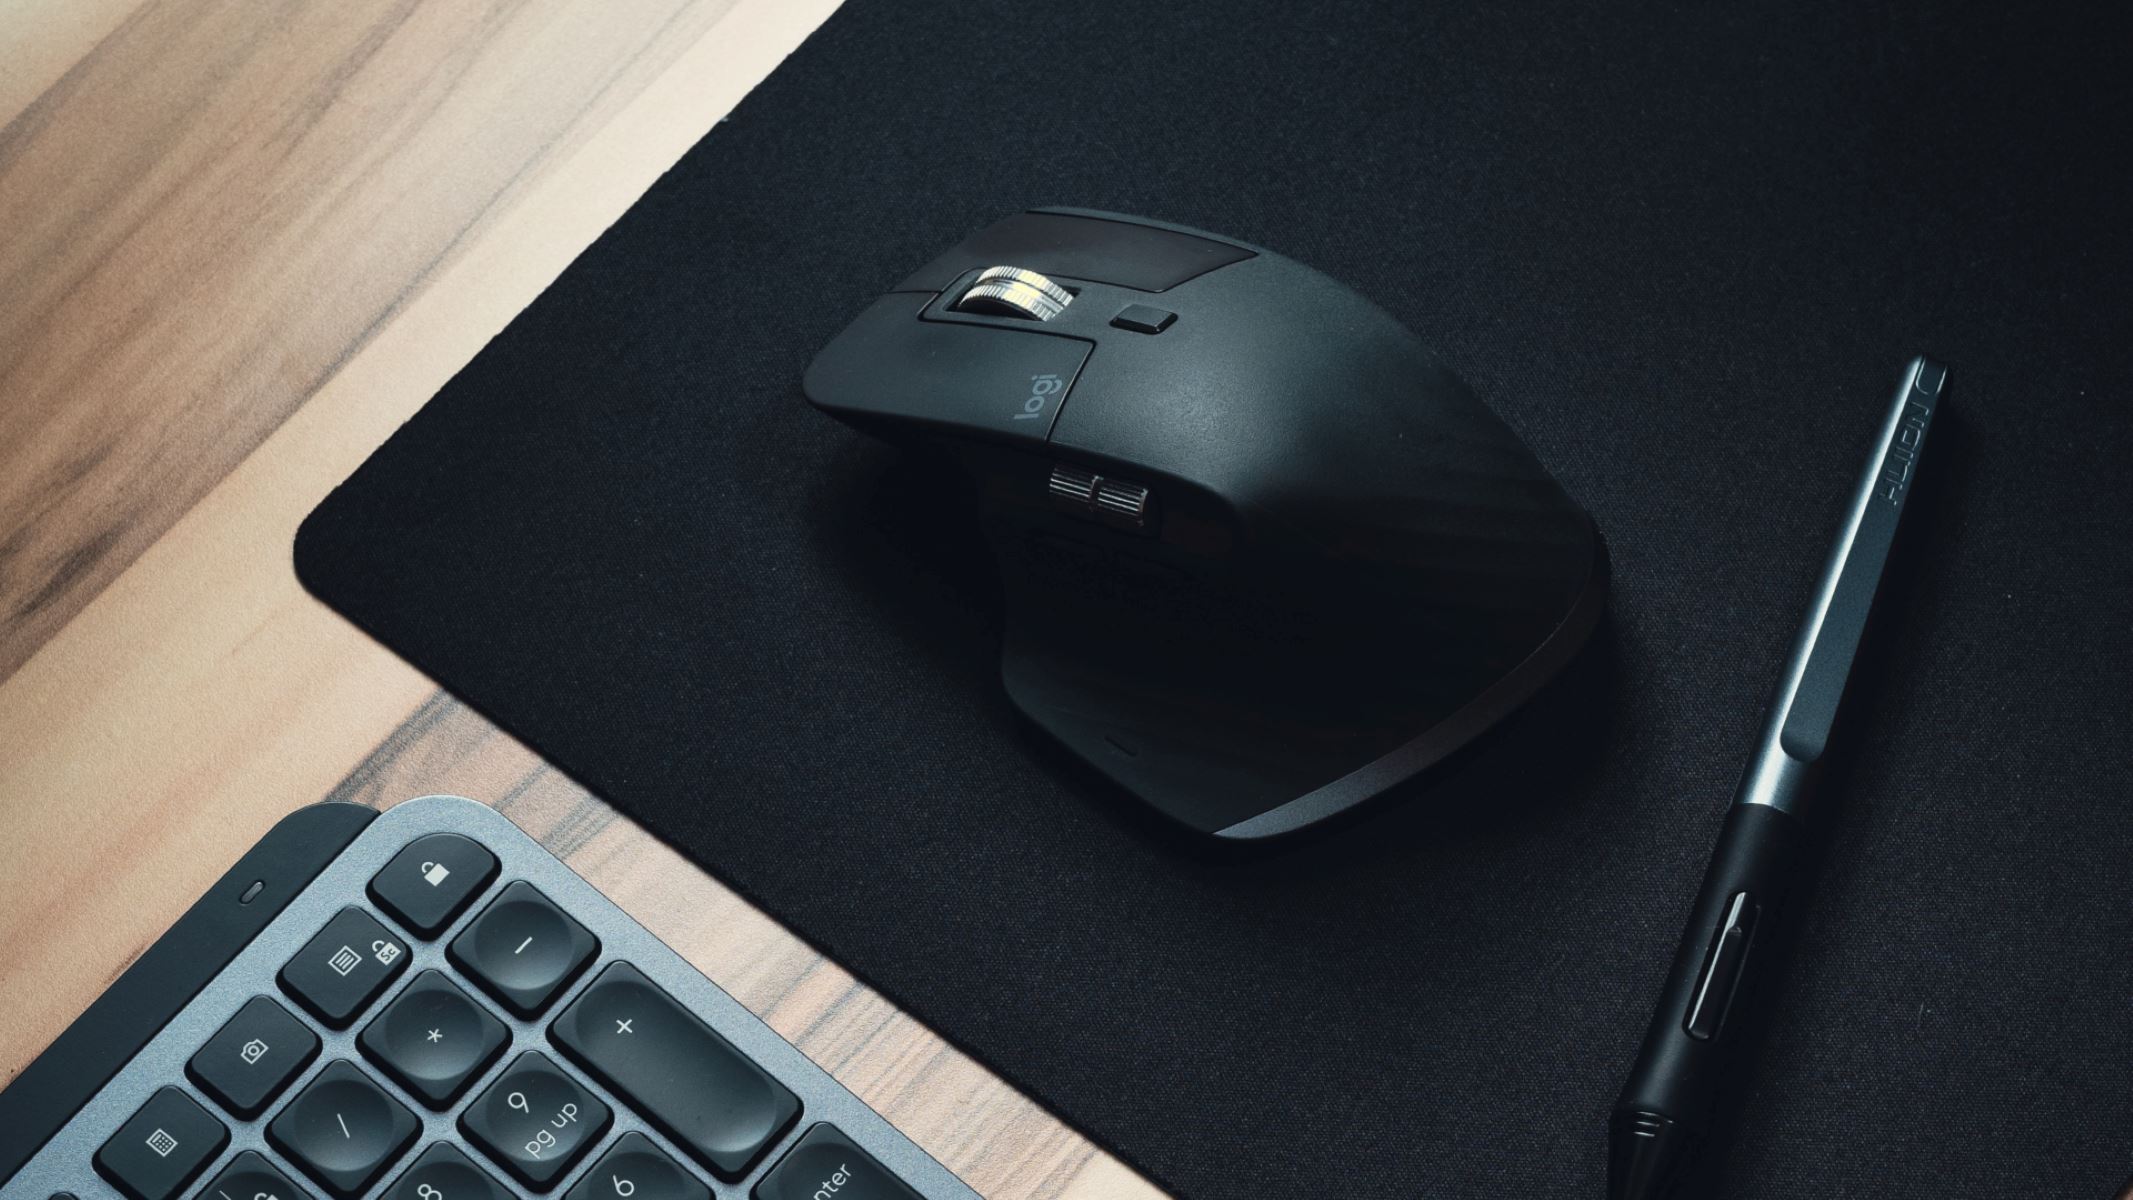 Top Reasons Your Mouse Cursor Slows Down – Is Your Mouse Outdated?